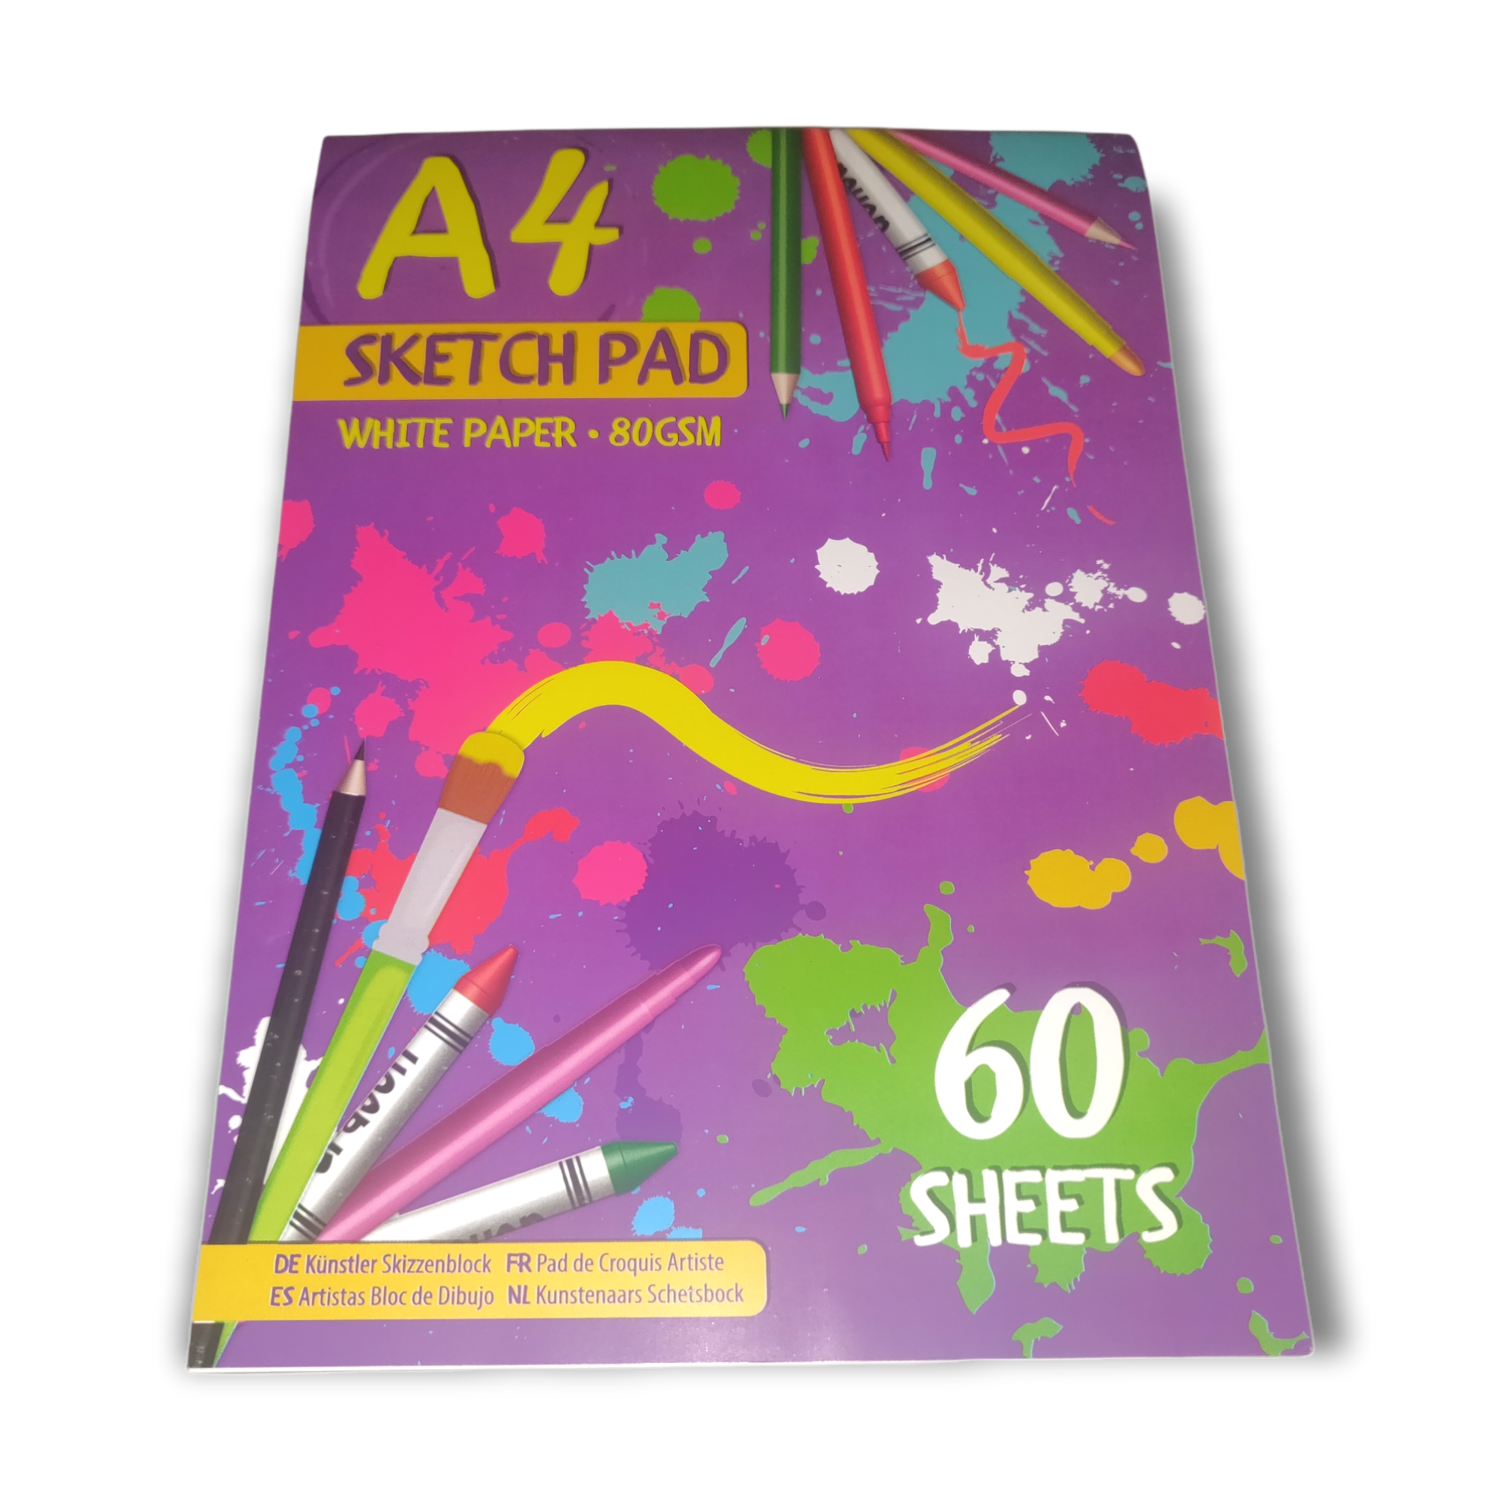 A4 Purple Sketch Pad - 60 White Sheets of 80gsm Paper